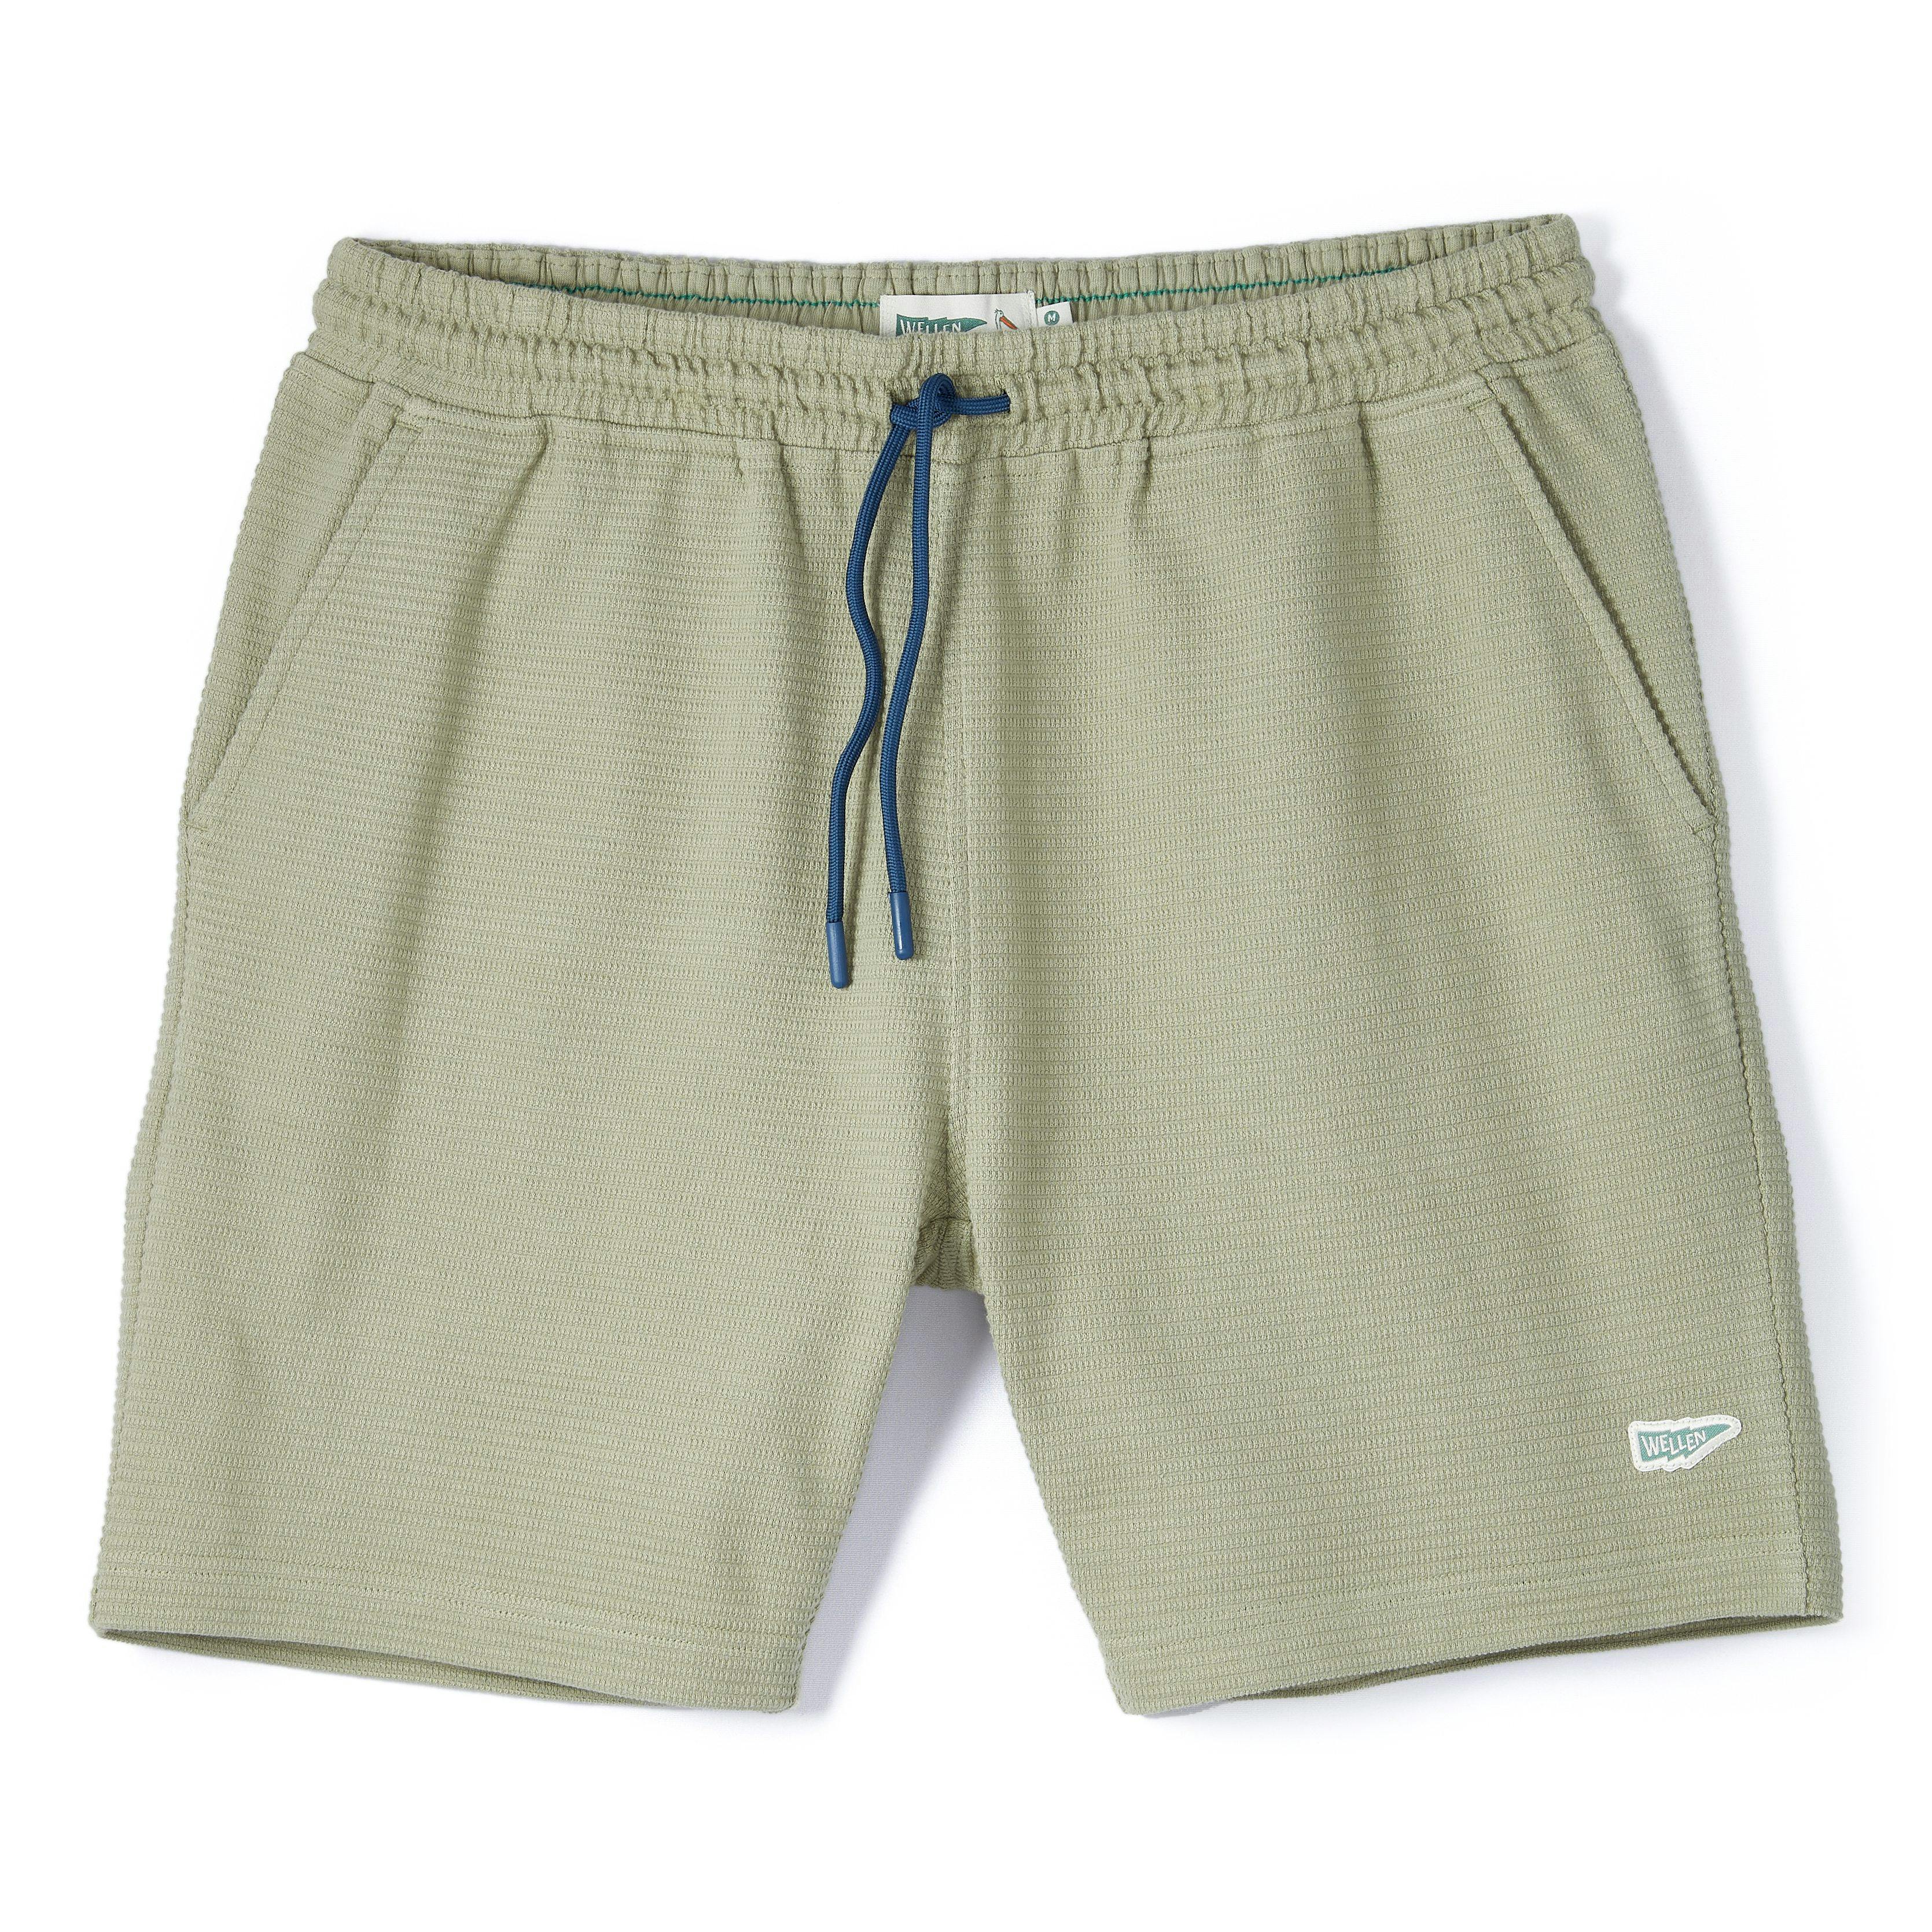 Everyday Short in Dusty Olive Green, Athletic Shorts, Myles Apparel